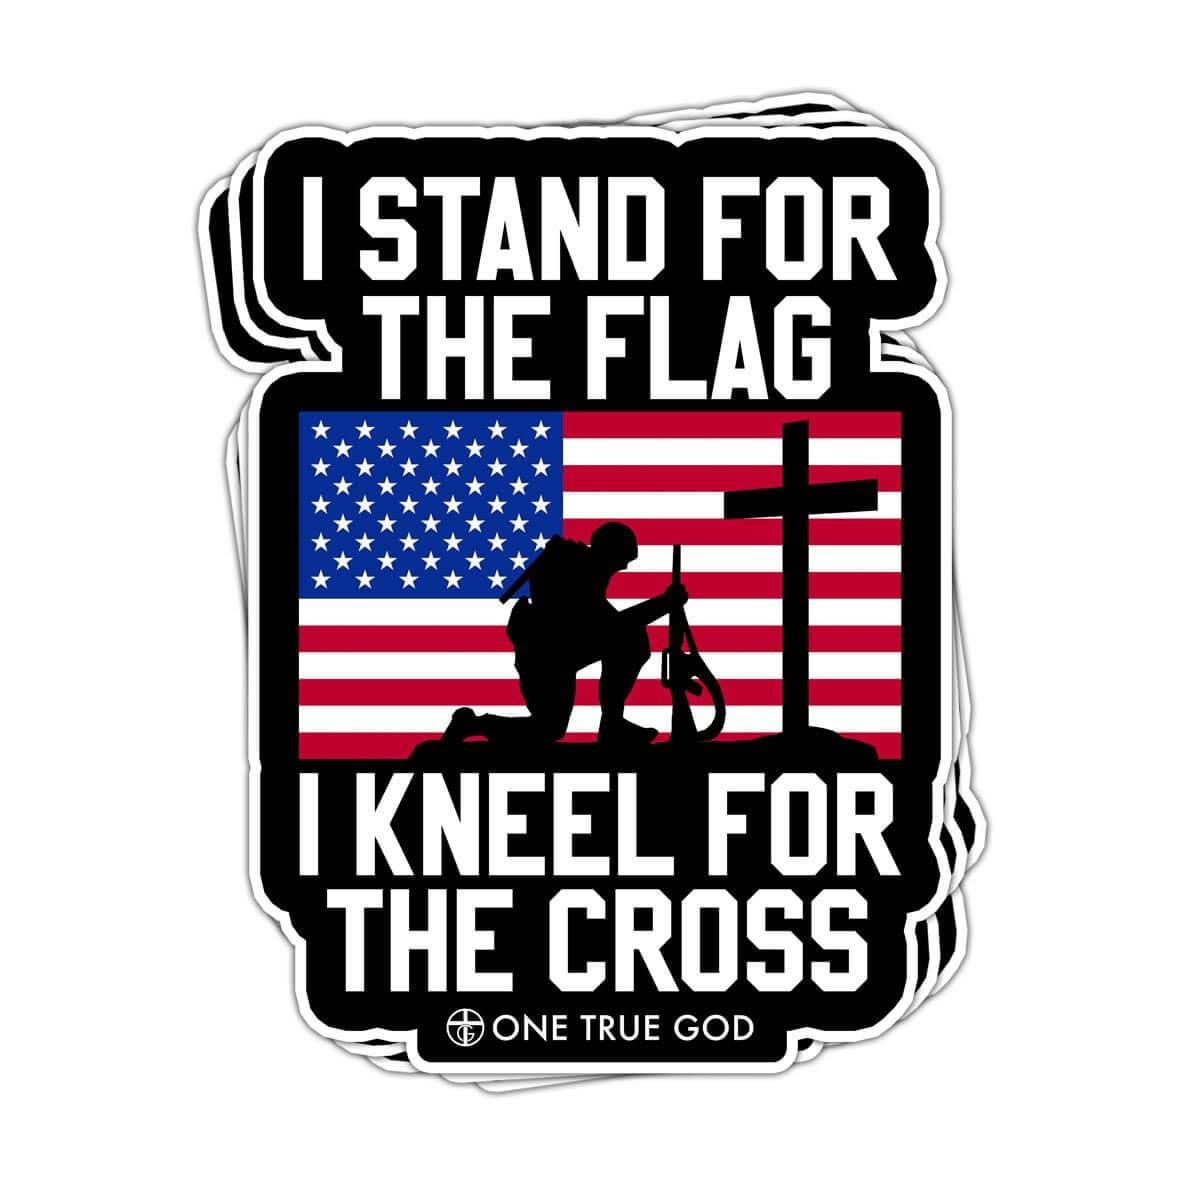 I Stand for the Flag Decals - Our True God